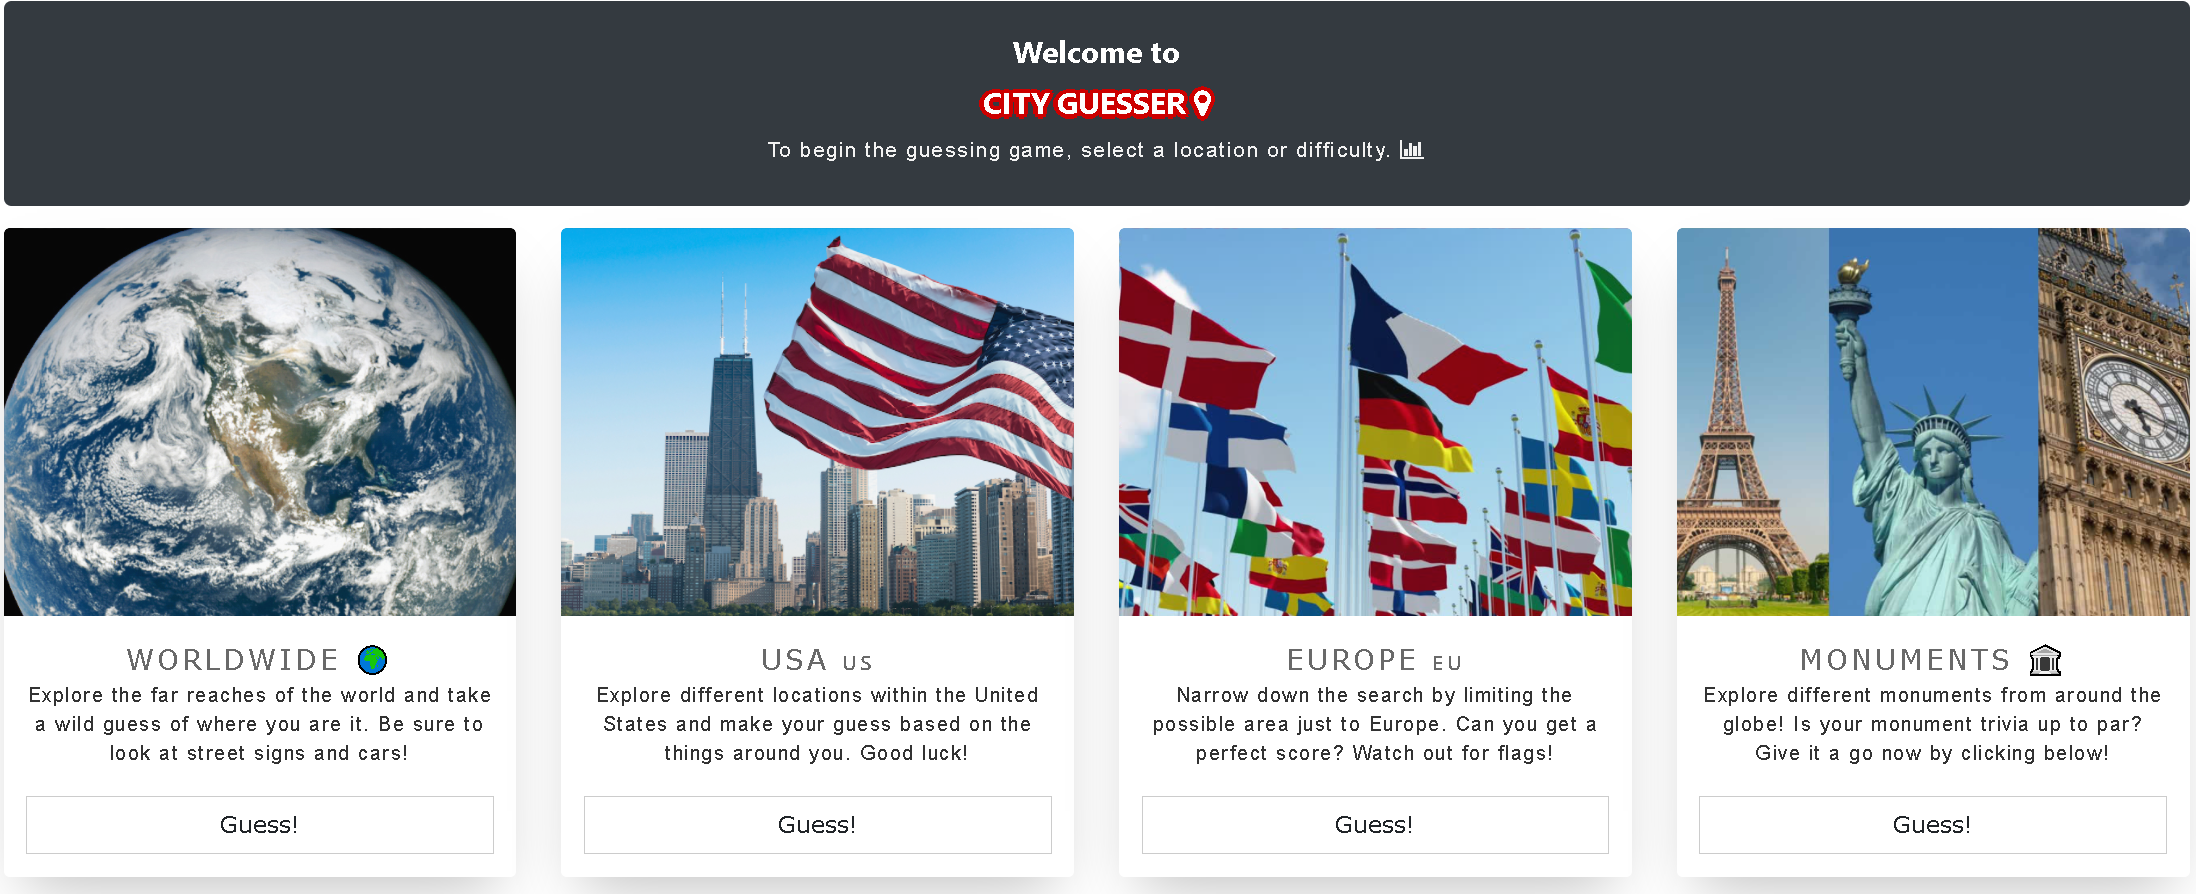 The City Guesser homepage. To play it asks you to choose a location and difficulty. The visible options are worldwide, USA, Europe, and monuments.